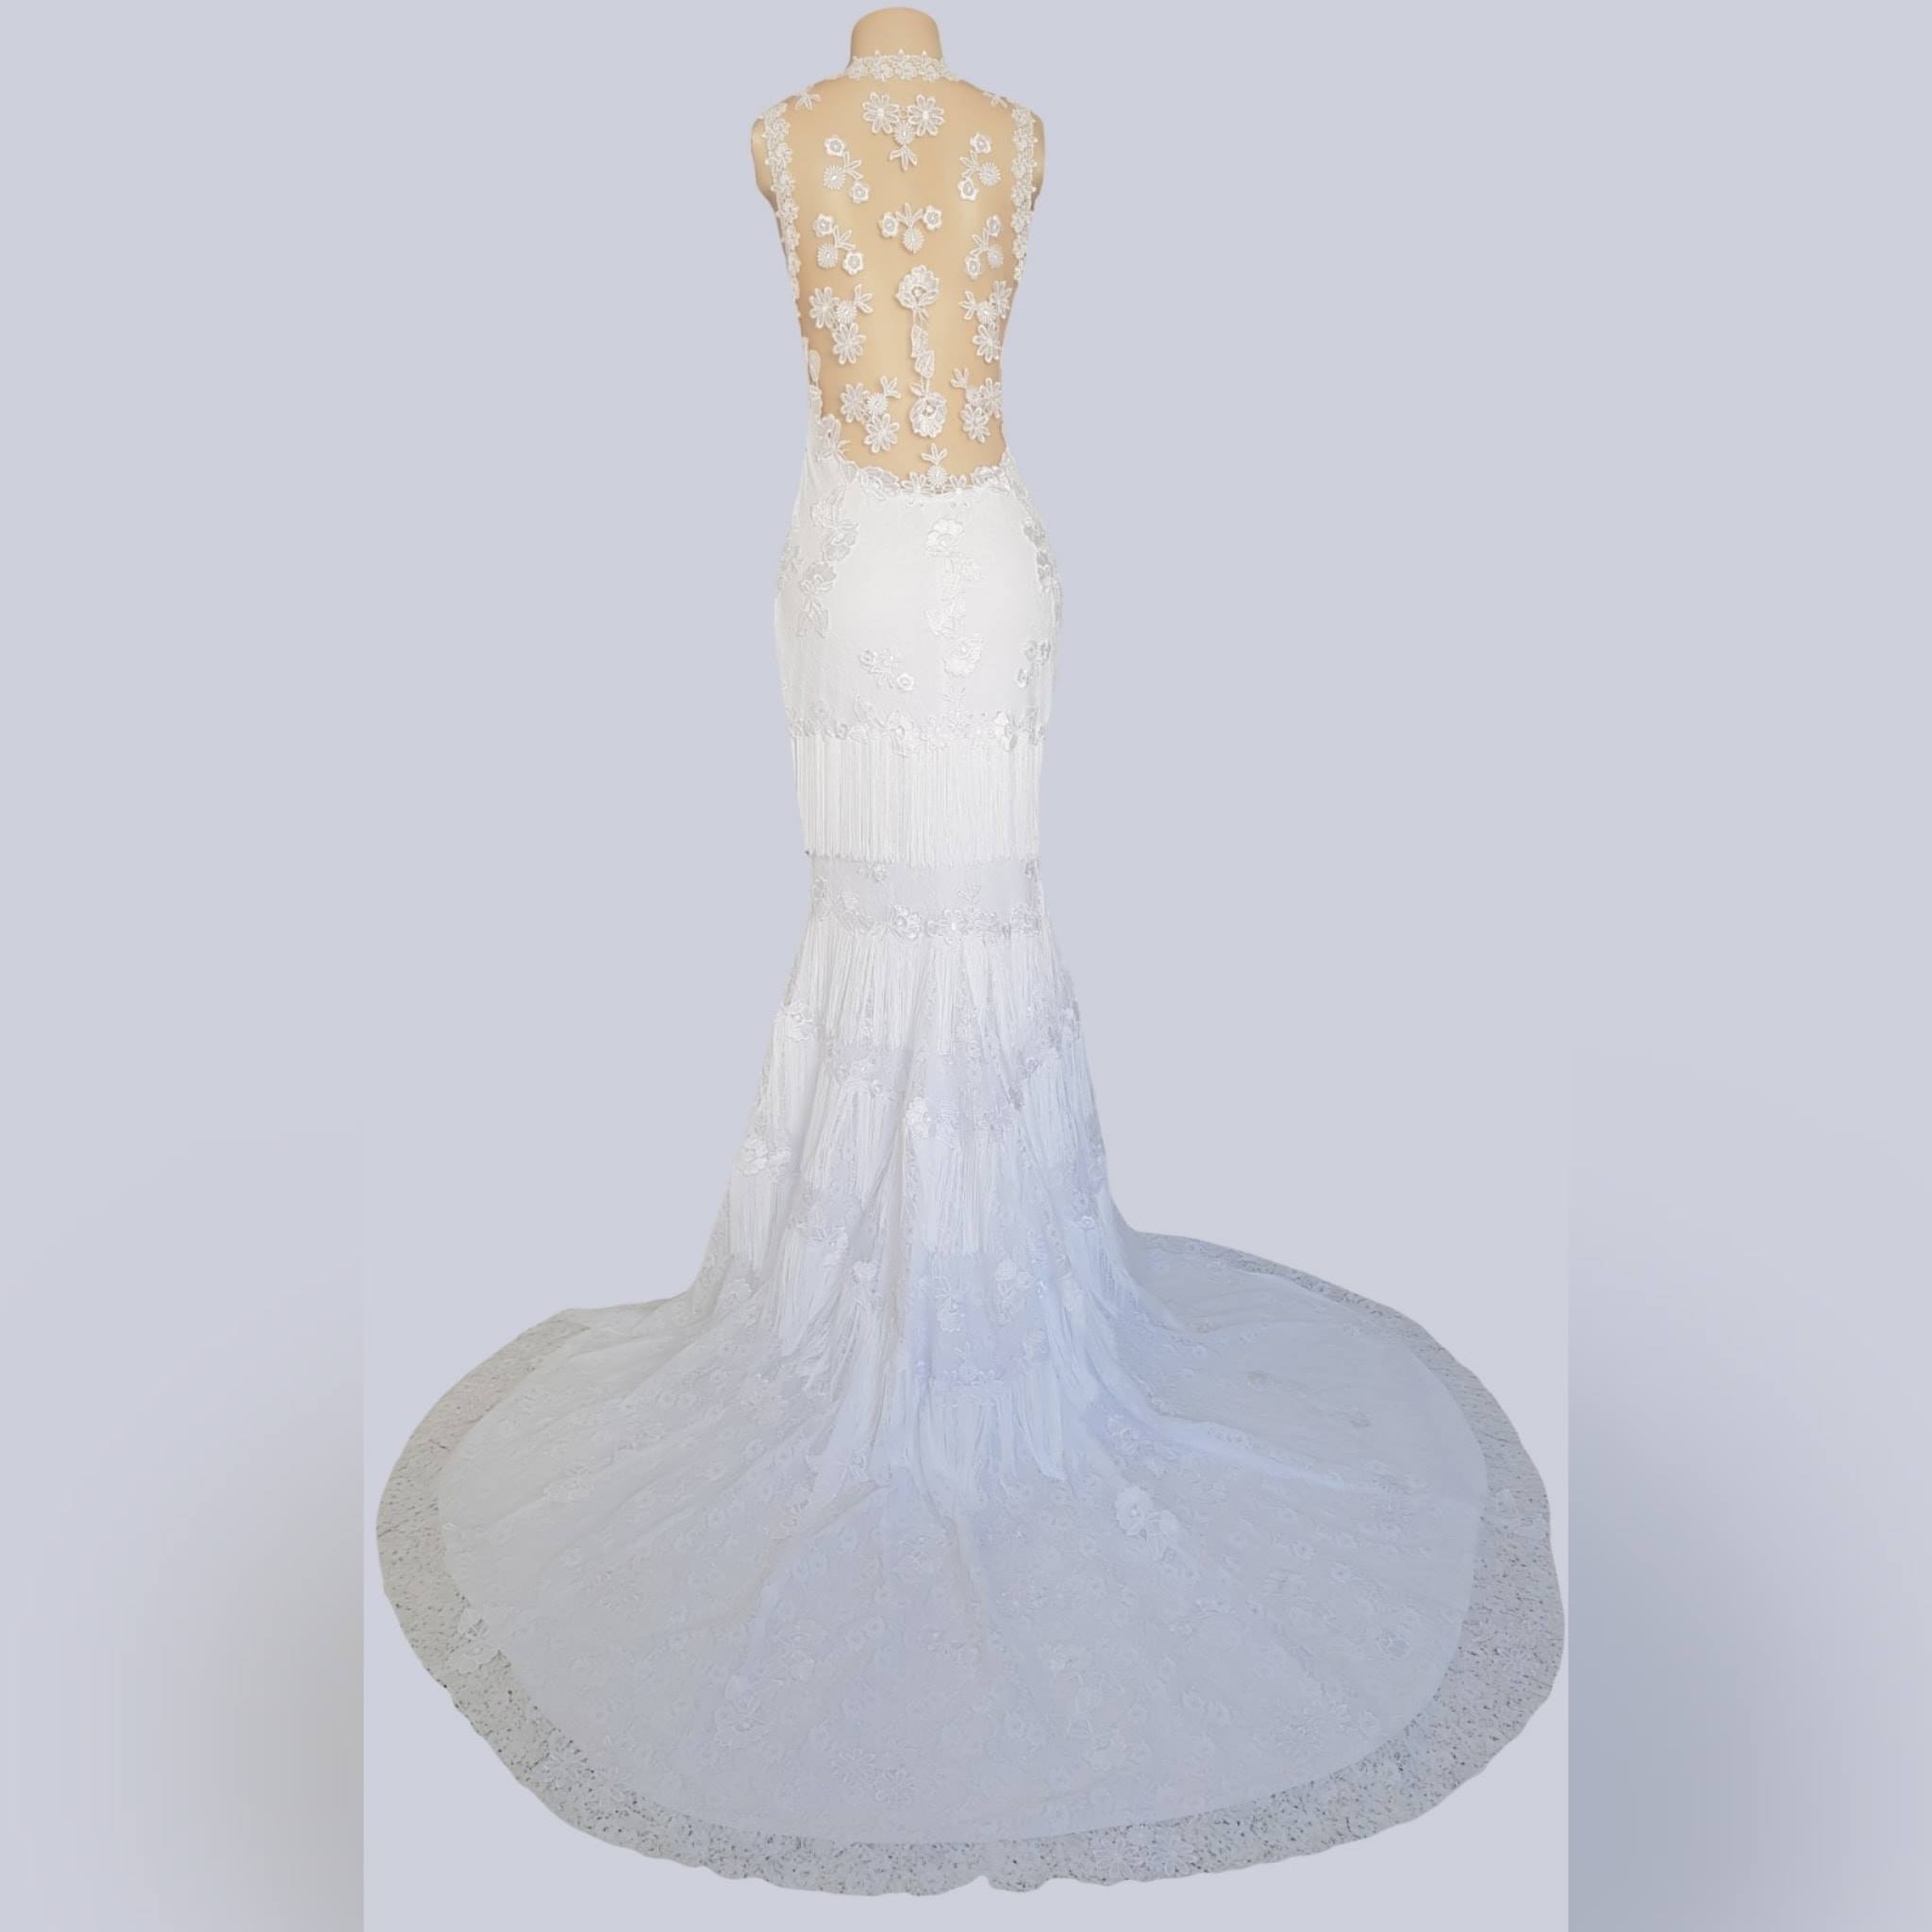 White lace mermaid bridal dress 14 <blockquote>"above all be the heroine of your life, not the victim" nora ephron</blockquote> this unique mermaid lace wedding dress was created for my client in angola. White lace mermaid bridal dress detailed with lace appliques throughout, illusion back and neckline and a train. With tassels throughout the bottom to add a fun movement when dancing at the wedding ceremony. With a long veil that goes over the head #mariselaveludo #passion4fashion #weddingdress #bridedress #mermaidweddingdress #lacewhitedress #tassels #custommadedress